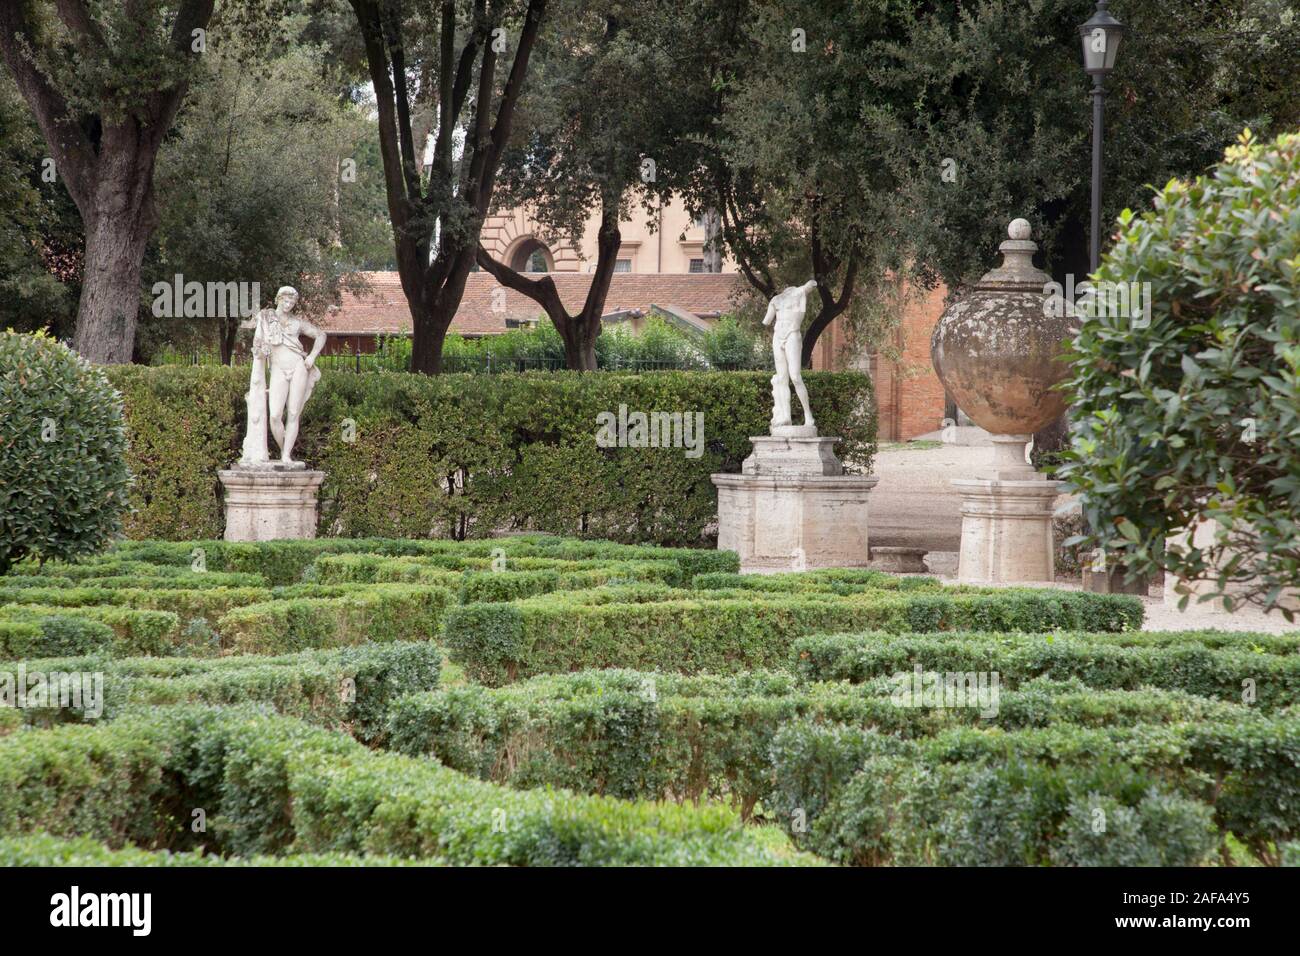 The gardens at the Galleria Borghese (Borghese Gallery), Rome Stock Photo